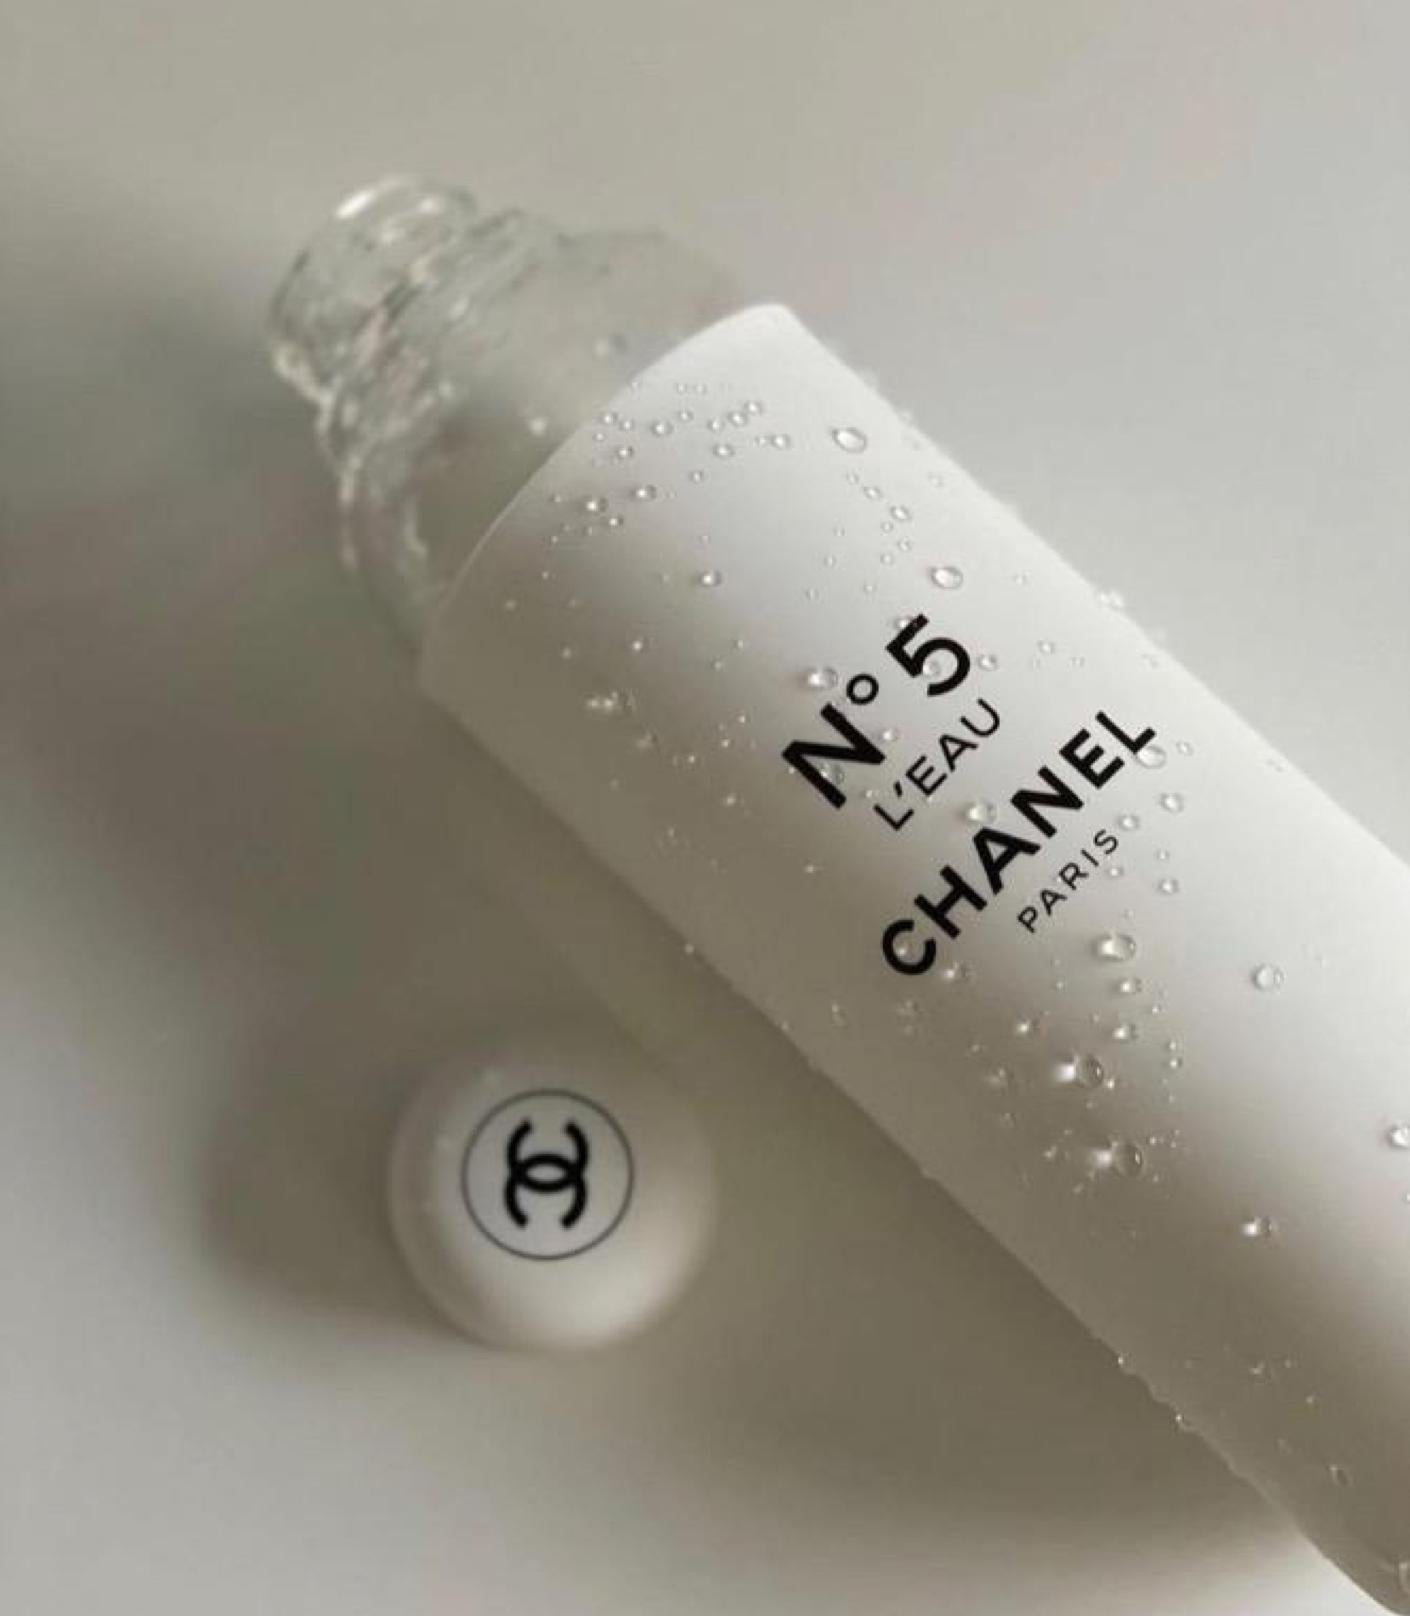 A glass water bottle (590 ml) whose label adopts the same visual identity as the N°5 perfume bottle.
N°5 is the most iconic fragrance of the century. A radical creation that revolutionized the traditions of its era. A design piece turned icon that